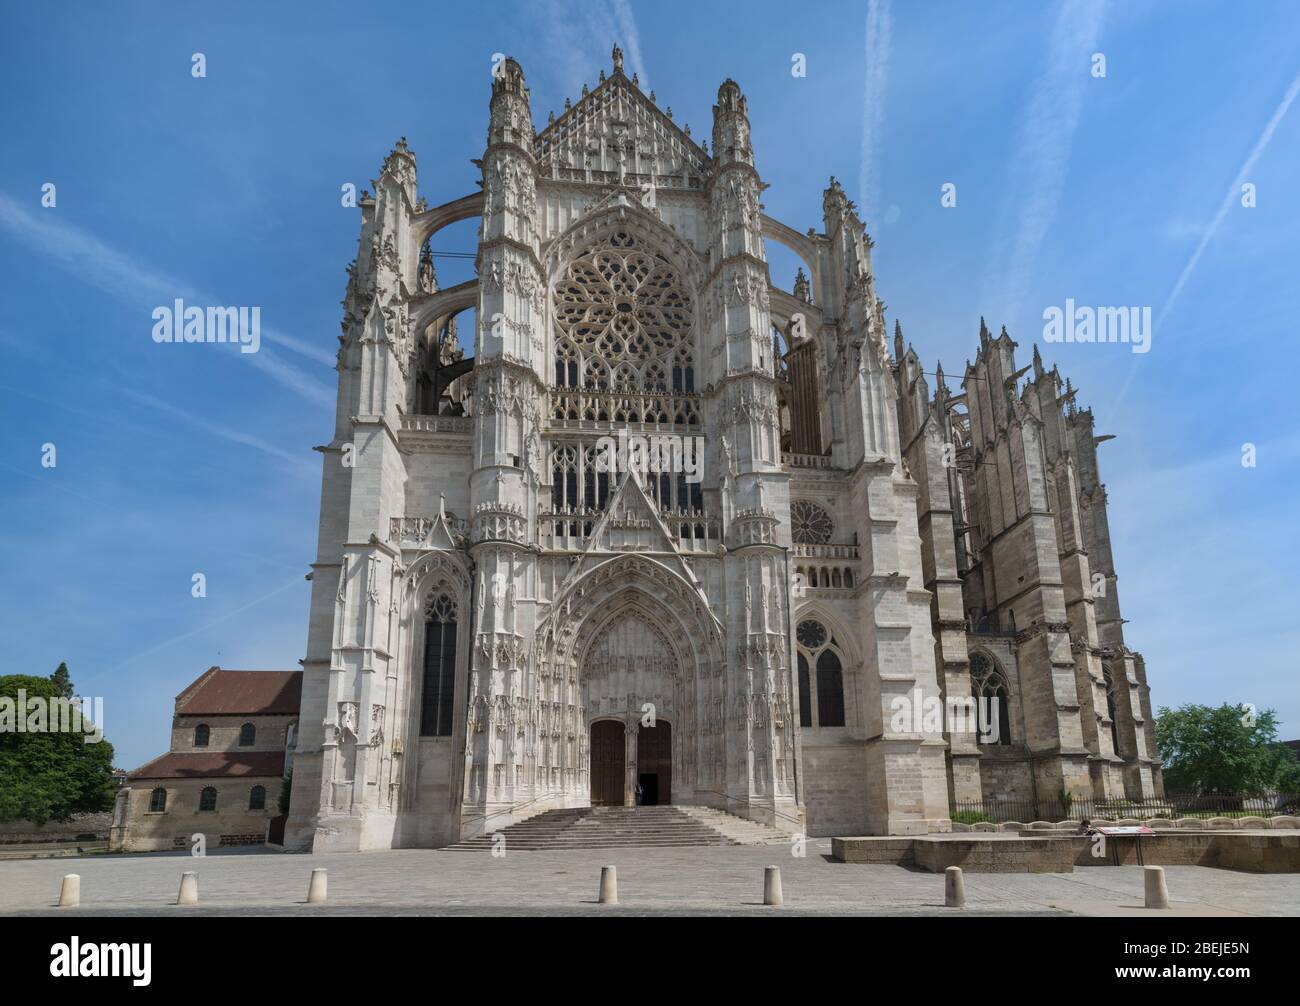 The Cathedral of Saint Peter of Beauvais (Cathédrale Saint-Pierre de Beauvais)  Roman Catholic church of the Gothic style - Beauvais, France. Stock Photo